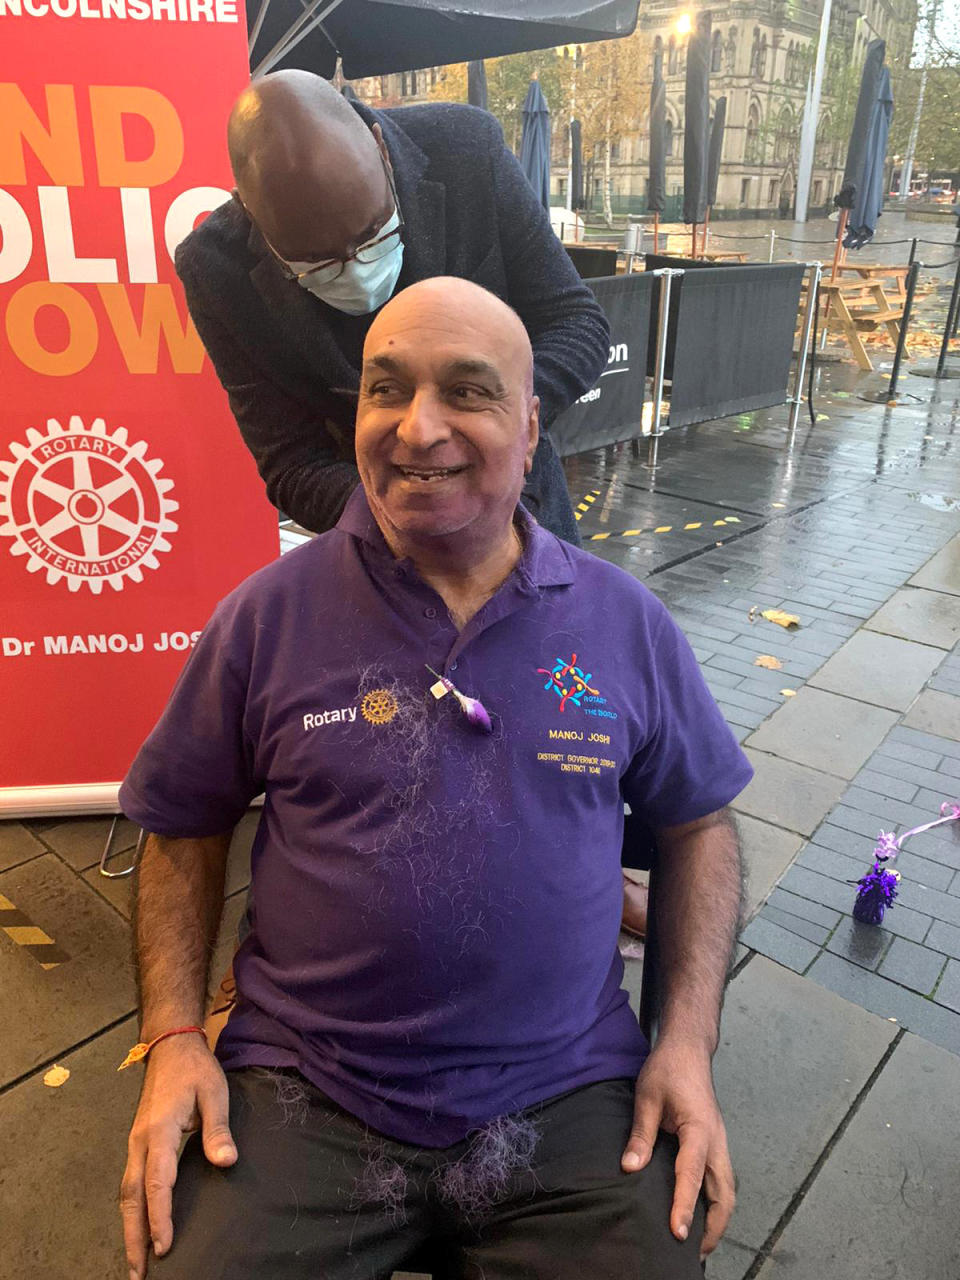 Dr Manoj Joshi, 68, shaved his moustache for the first time in 52 YEARS at Bradford City Hall to raise funds to eradicate polio. See SWNS story SWLEmoustache; A man who shaved his moustache to raise funds for a polio vaccine says his wife cant even recognise him - after he trimmed it for the first time in 52 YEARS. Dr Manoj Joshi, 68, says he had never shaved his moustache ever since he could grow one as a fresh faced 16-year-old but decided to chop it all off in a bid to eradicate polio. But after he chopped it off his shocked wife said she couldnt recognise him as shed never seen him without it in the 42 years they had been married. The grandfather-of-two joked that it would take a lawn mower to trim his luscious facial hair - which is older than the invention of the mobile phone. Dr Joshi, a proud Rotarian, which is a worldwide charitable society with over a million members worldwide, has been involved in what he calls acts of giving for his entire life. On World Polio Day (Saturday, Oct 24) he took centre stage at a park in front of Bradford City Hall to shave off his beloved moustache in an emotional day.